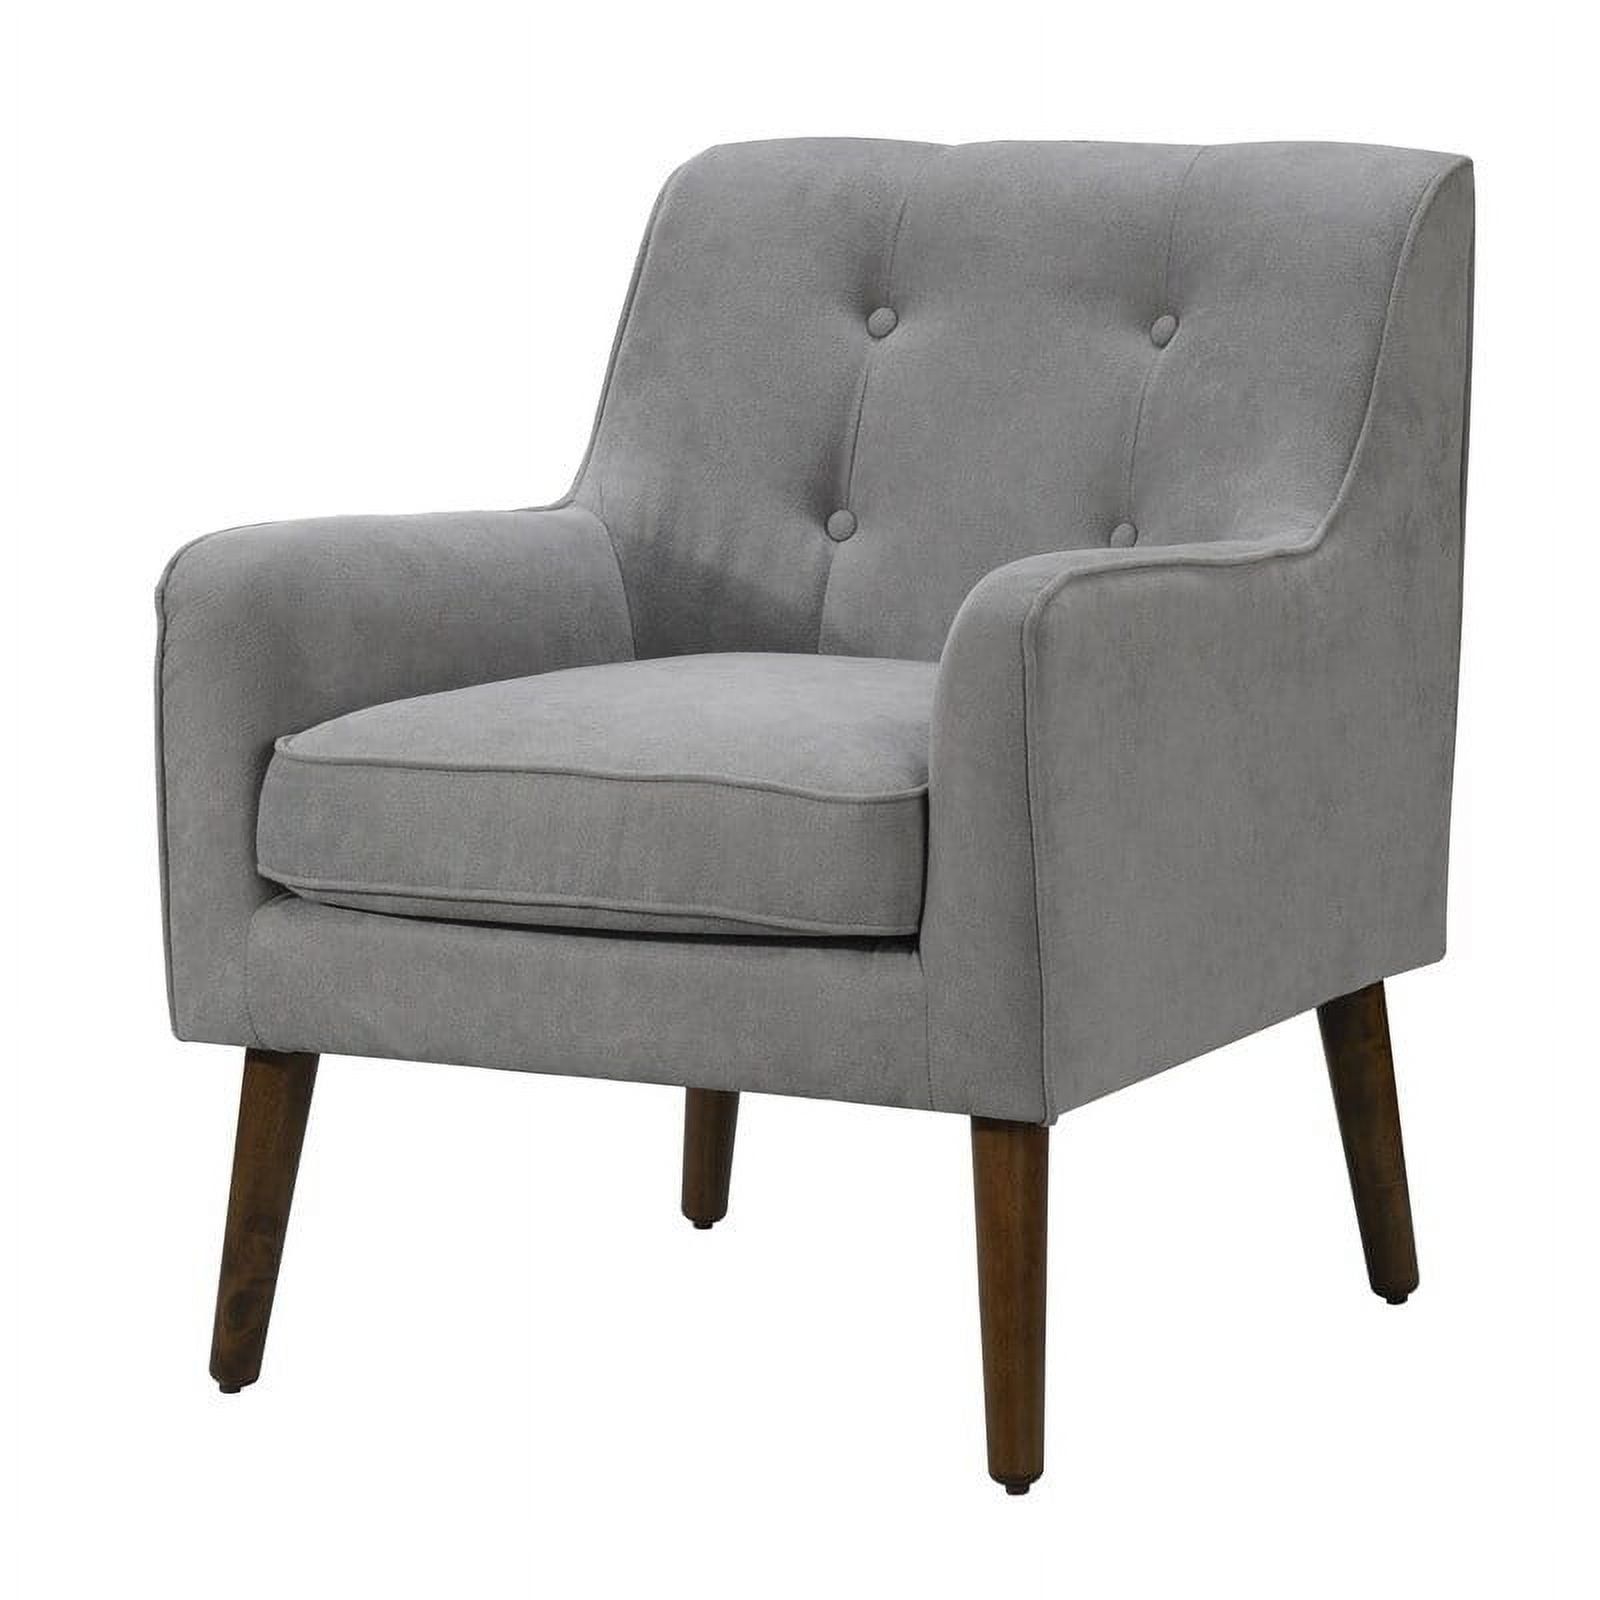 Ryder Steel Gray Woven Fabric Tufted Mid-Century Armchair